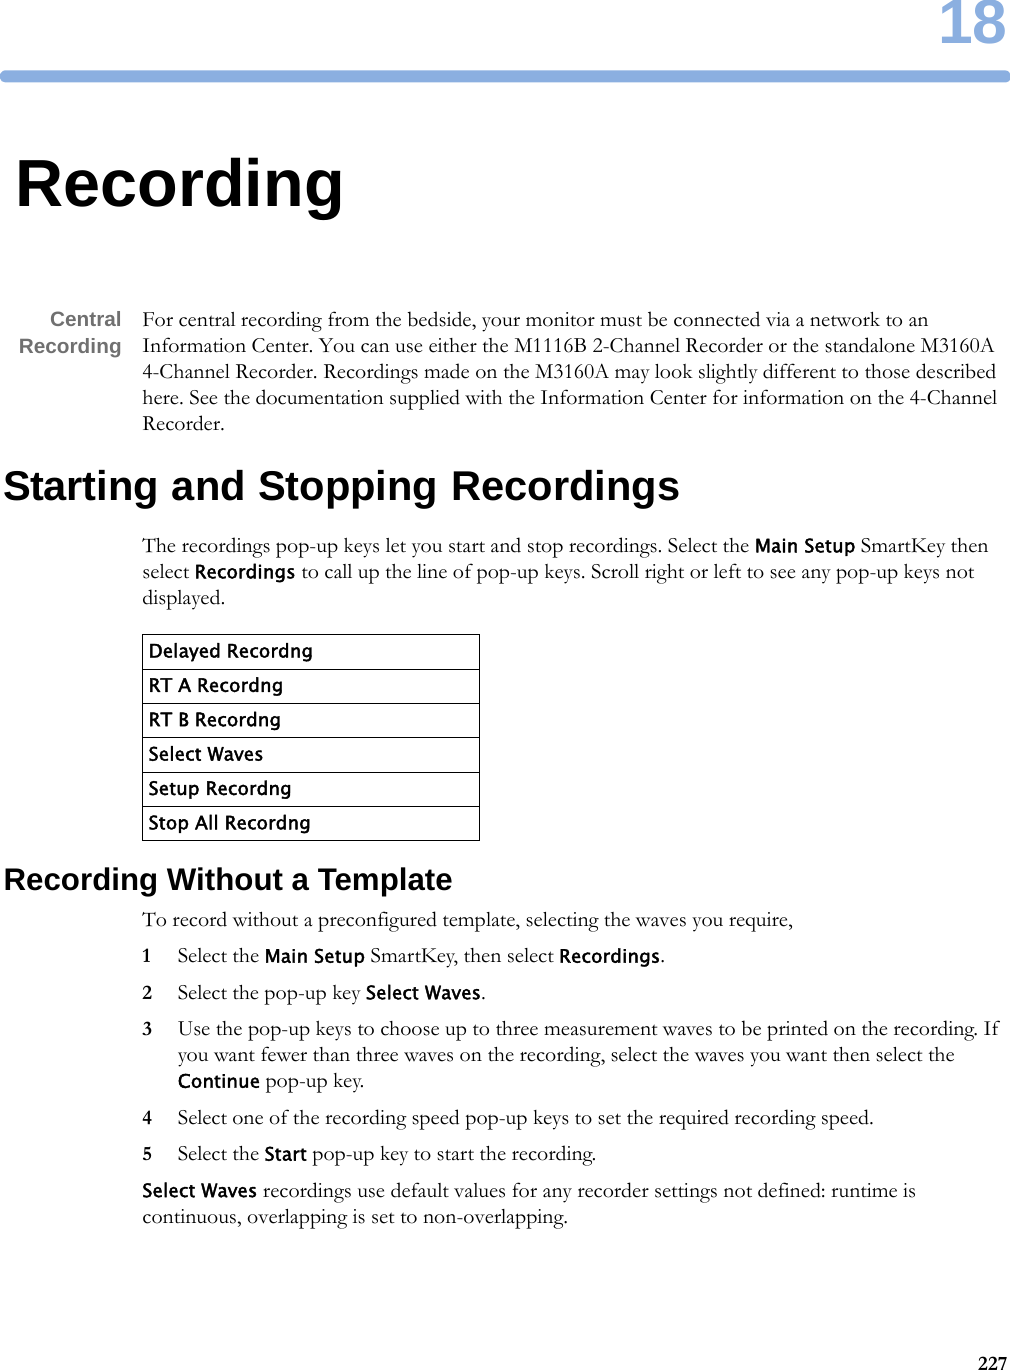 1822718RecordingCentralRecording For central recording from the bedside, your monitor must be connected via a network to an Information Center. You can use either the M1116B 2-Channel Recorder or the standalone M3160A 4-Channel Recorder. Recordings made on the M3160A may look slightly different to those described here. See the documentation supplied with the Information Center for information on the 4-Channel Recorder.Starting and Stopping RecordingsThe recordings pop-up keys let you start and stop recordings. Select the Main Setup SmartKey then select Recordings to call up the line of pop-up keys. Scroll right or left to see any pop-up keys not displayed.Recording Without a TemplateTo record without a preconfigured template, selecting the waves you require,1Select the Main Setup SmartKey, then select Recordings.2Select the pop-up key Select Waves.3Use the pop-up keys to choose up to three measurement waves to be printed on the recording. If you want fewer than three waves on the recording, select the waves you want then select the Continue pop-up key.4Select one of the recording speed pop-up keys to set the required recording speed.5Select the Start pop-up key to start the recording.Select Waves recordings use default values for any recorder settings not defined: runtime is continuous, overlapping is set to non-overlapping.Delayed RecordngRT A RecordngRT B RecordngSelect WavesSetup RecordngStop All Recordng